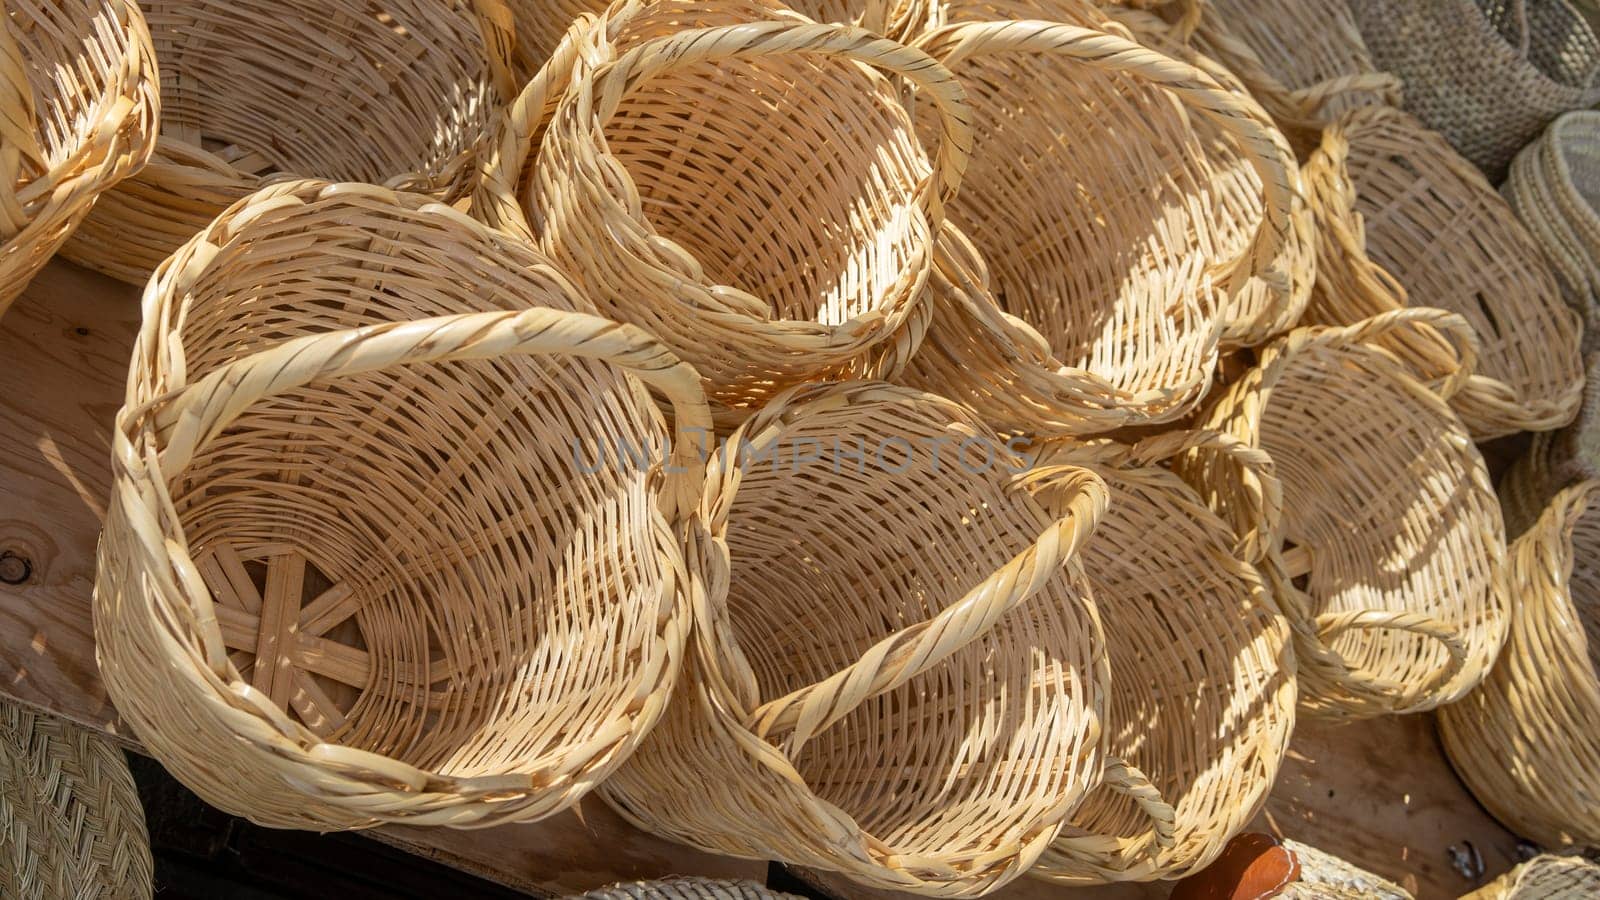 Traditional Craftsmanship of Baleares: An Assortment of Wicker Baskets by Juanjo39